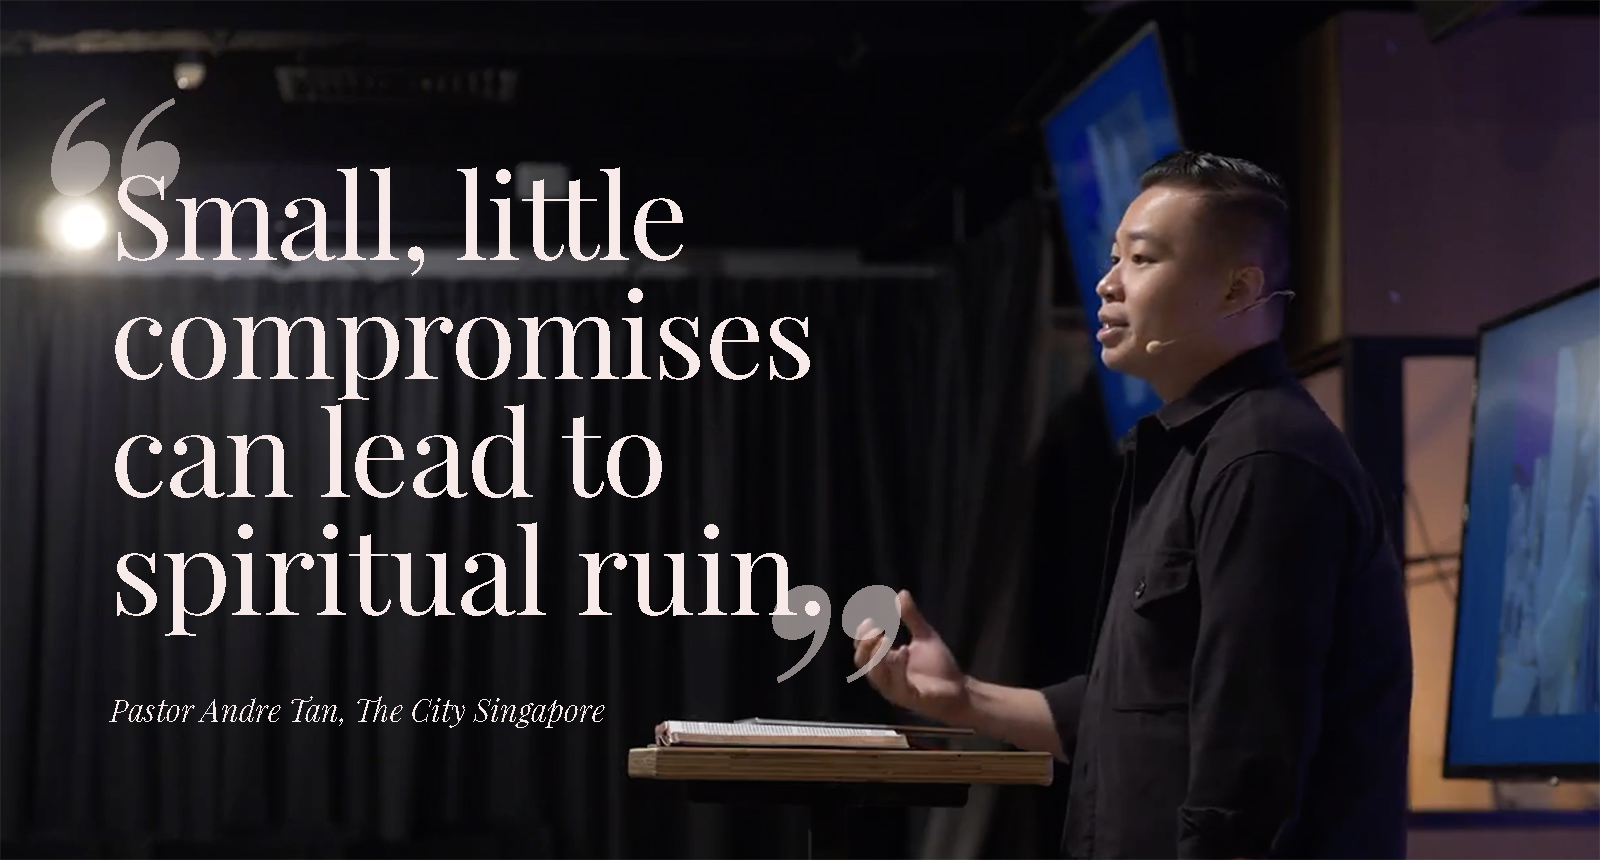 Small, little compromises can lead to spiritual ruin" Pastor Andre Tan, The City Singapore